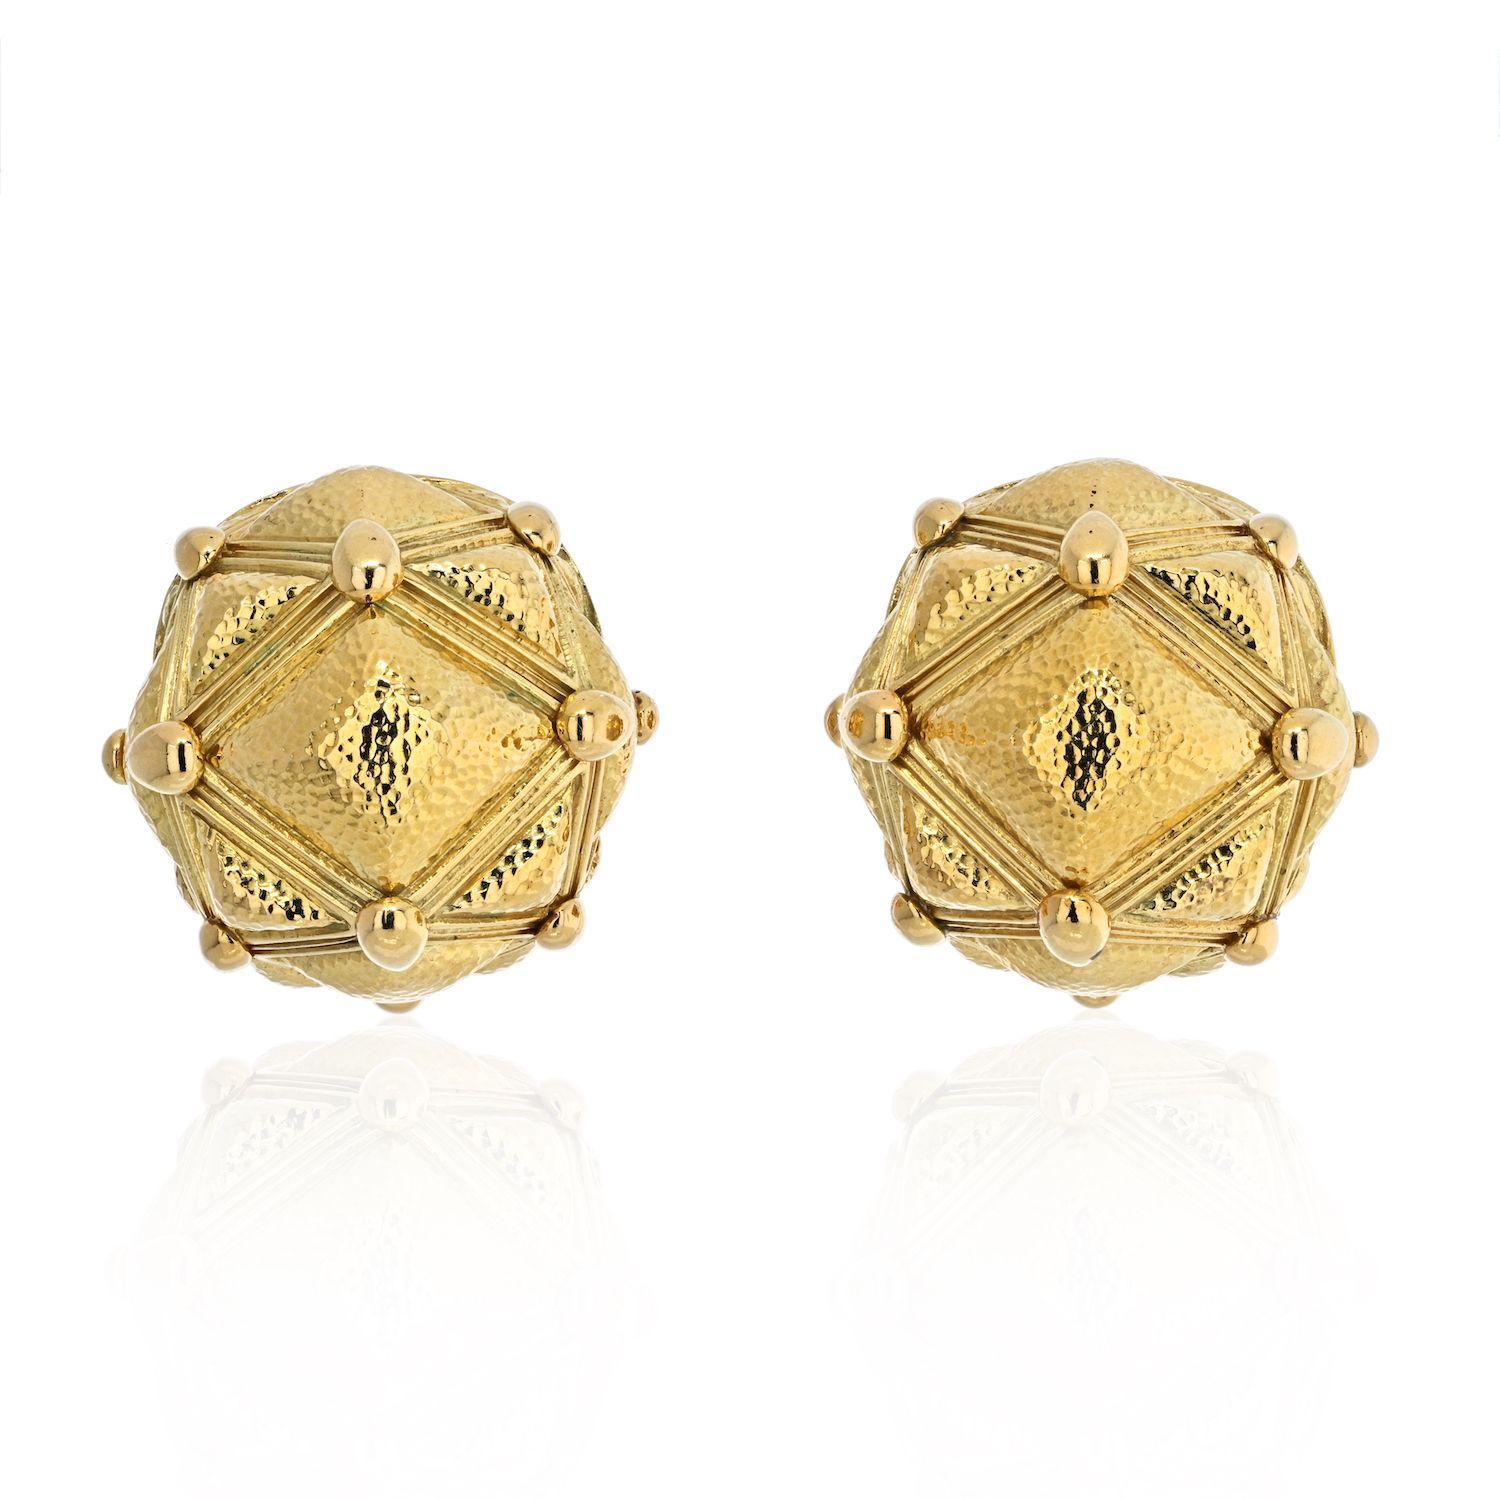 A pair of 'Geodesic Dome' clip earrings by David Webb from the 57th Street collection. In 18k yellow gold these earrings feature tear drops of gold scattered across a raised dome of textured gold, connected together in a geometric design.
David Webb